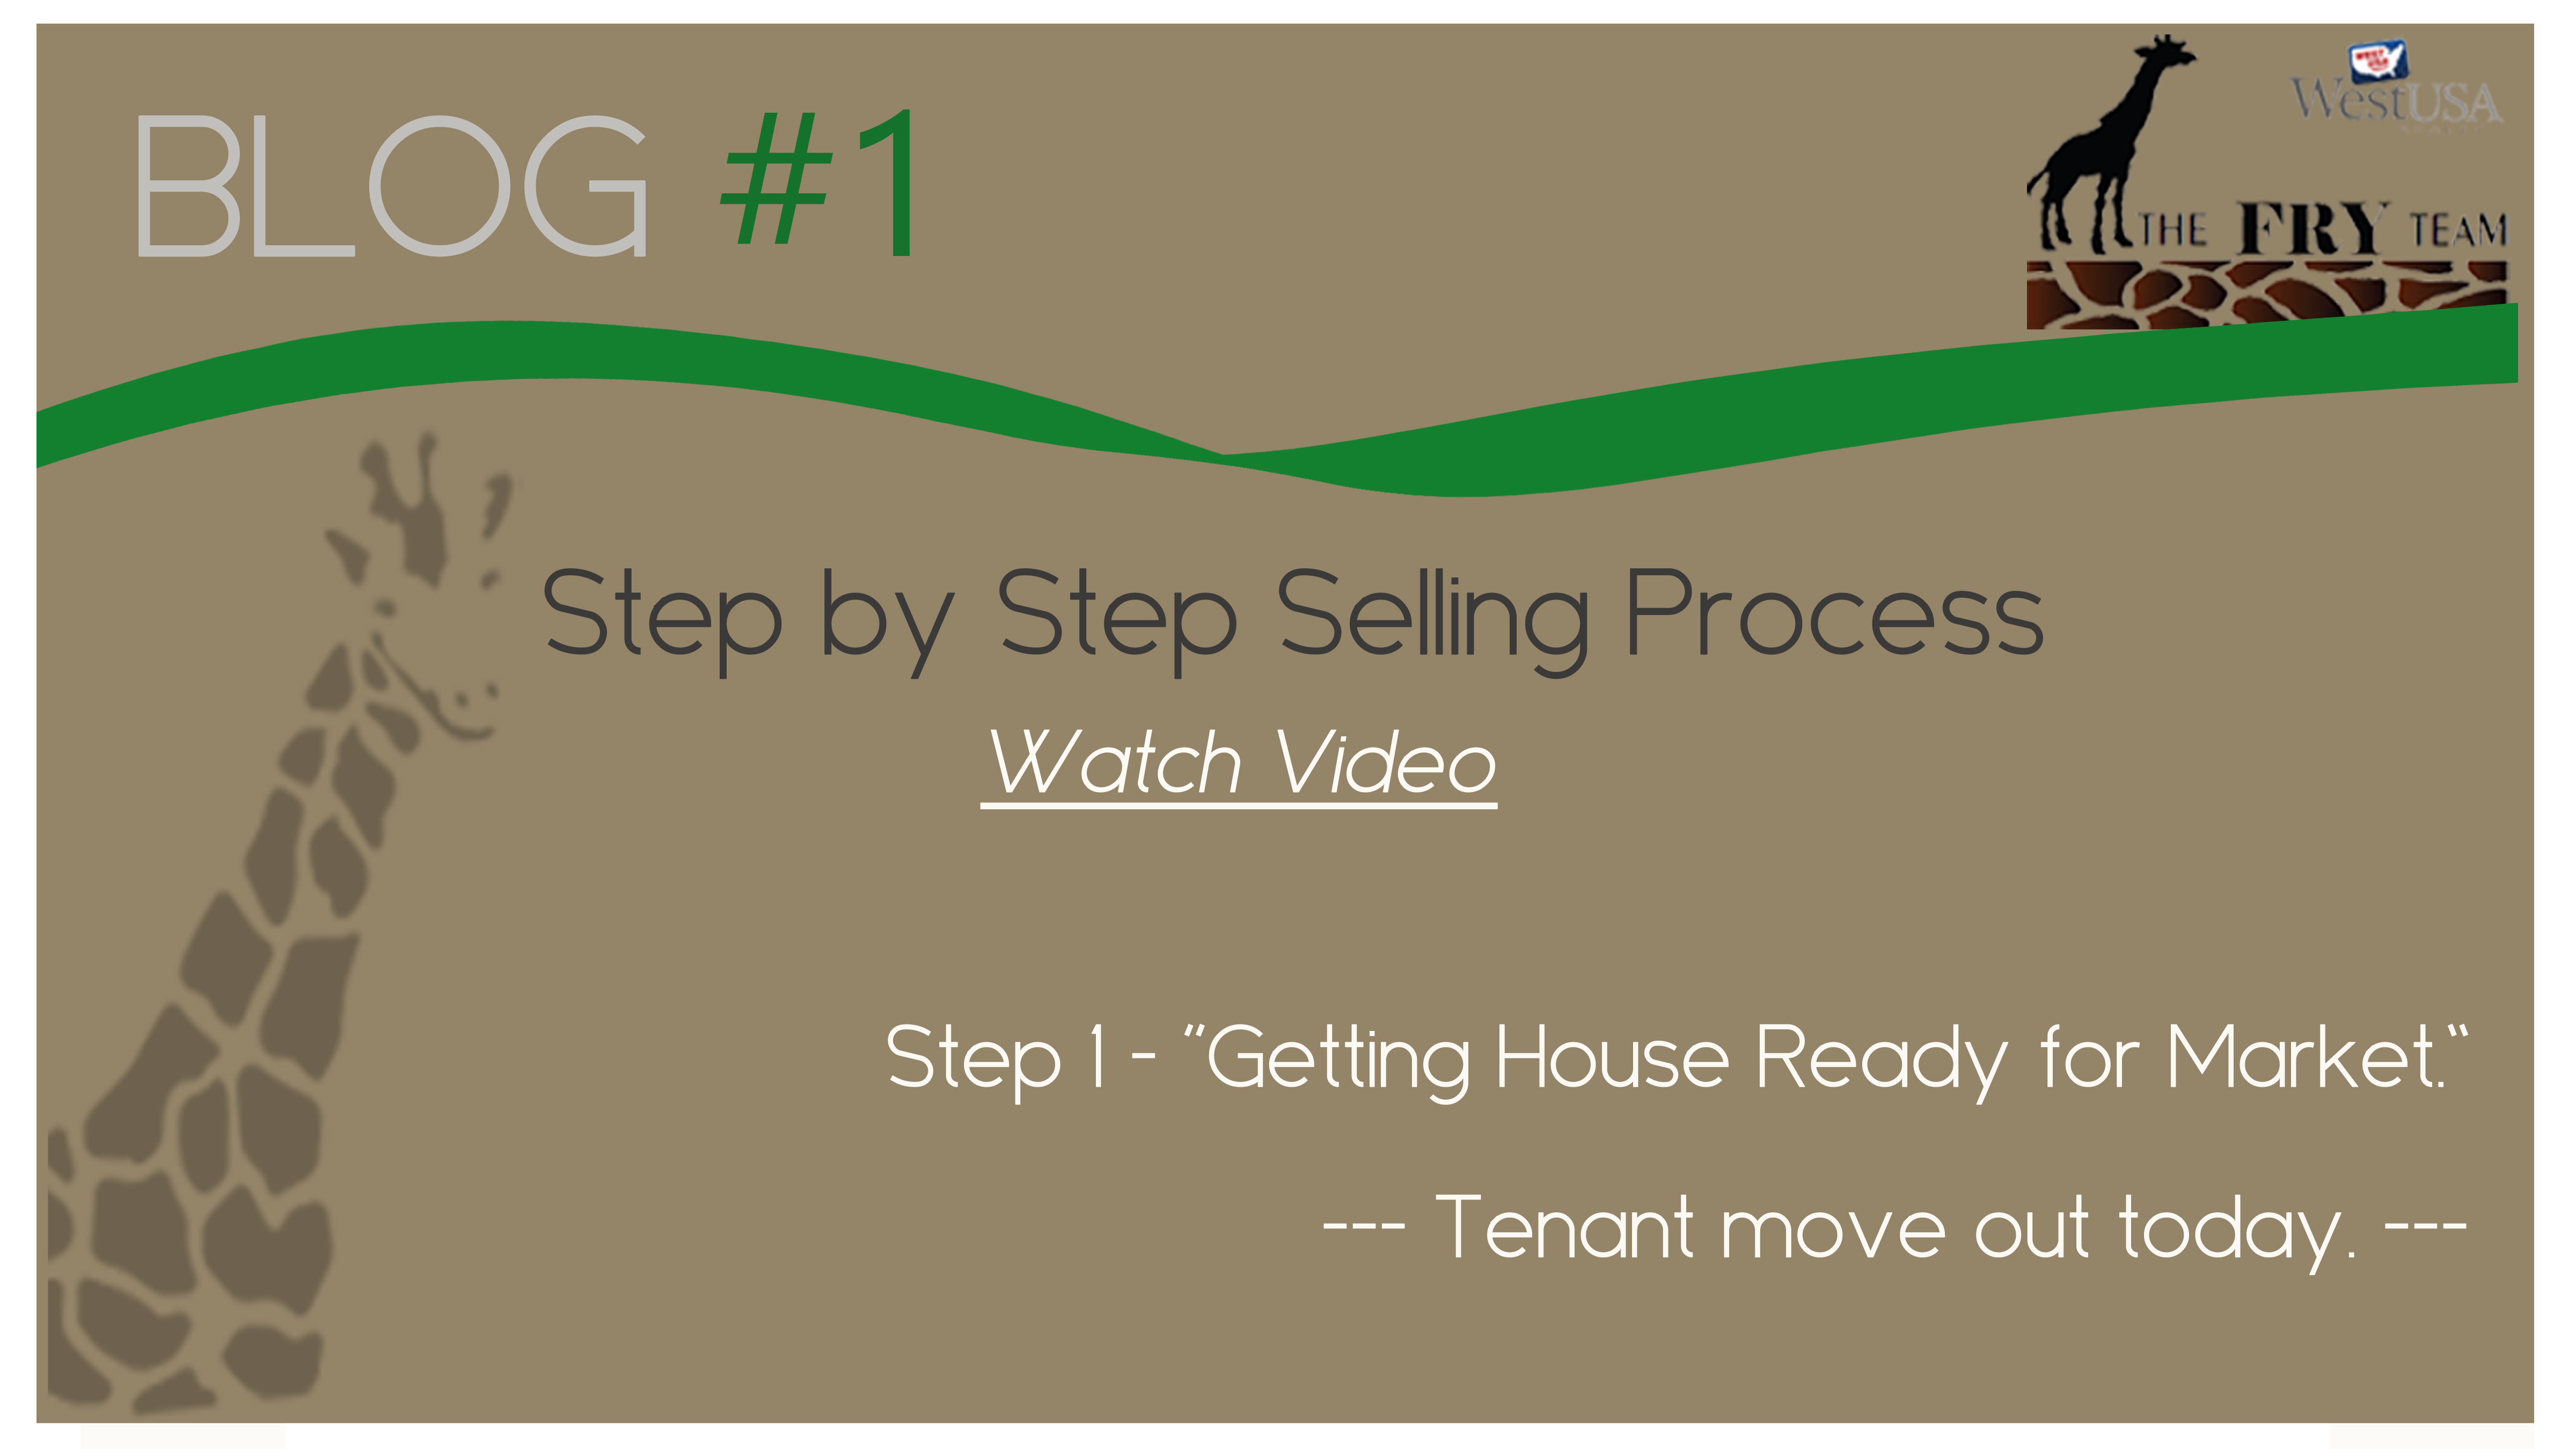 Step 1 – Getting House Ready for Market